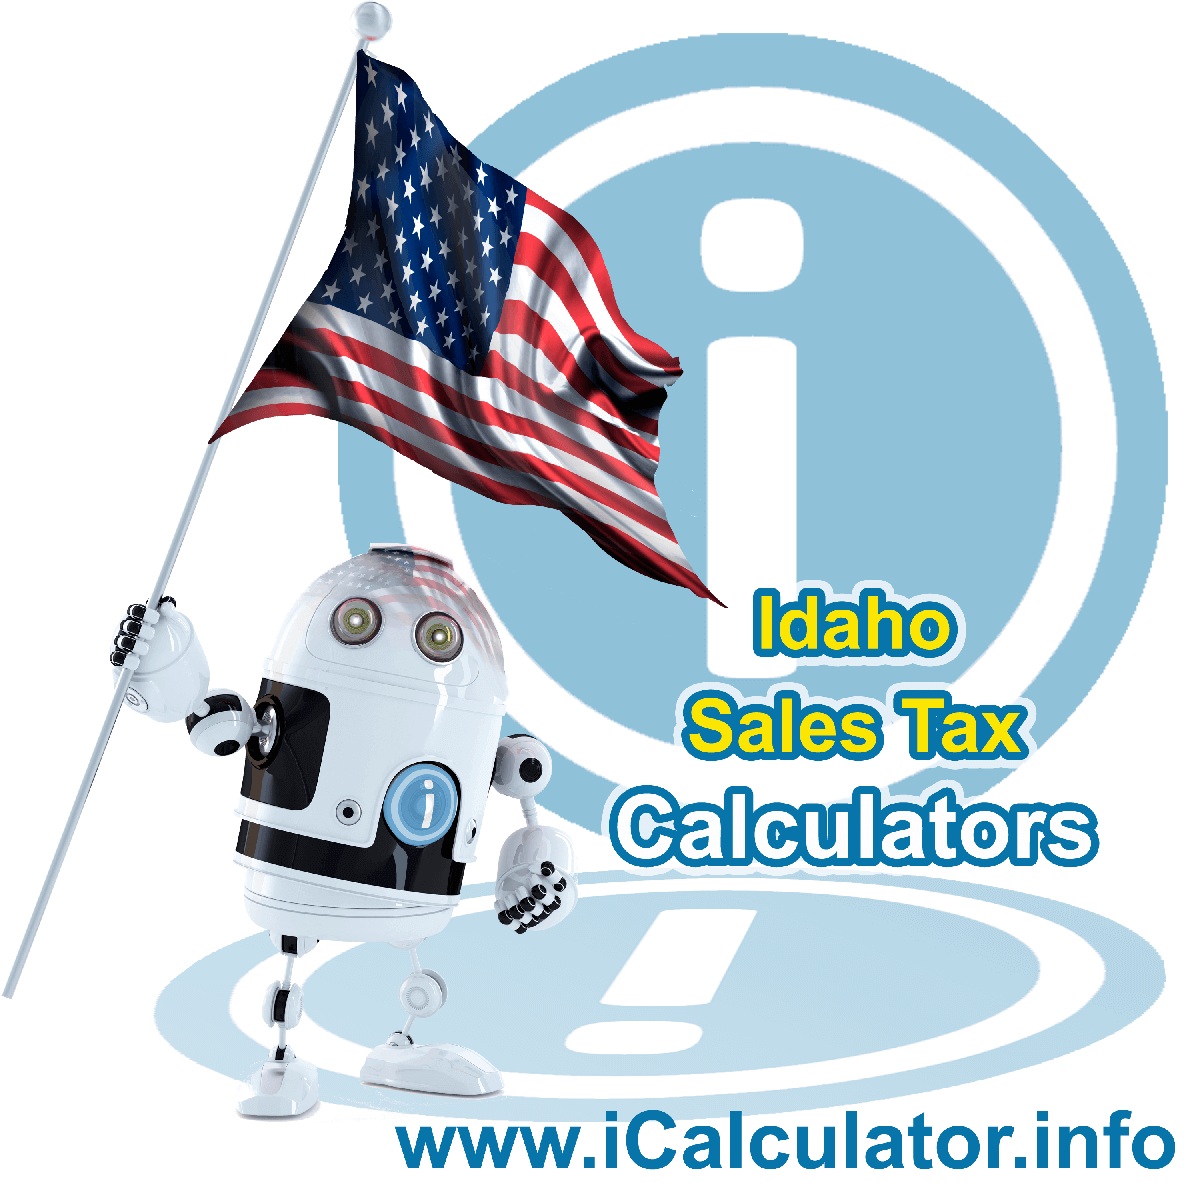 Idaho Sales Tax Comparison Calculator: This image illustrates a calculator robot comparing sales tax in Idaho manually using the Idaho Sales Tax Formula. You can use this information to compare Sales Tax manually or use the Idaho Sales Tax Comparison Calculator to calculate and compare Idaho sales tax online.